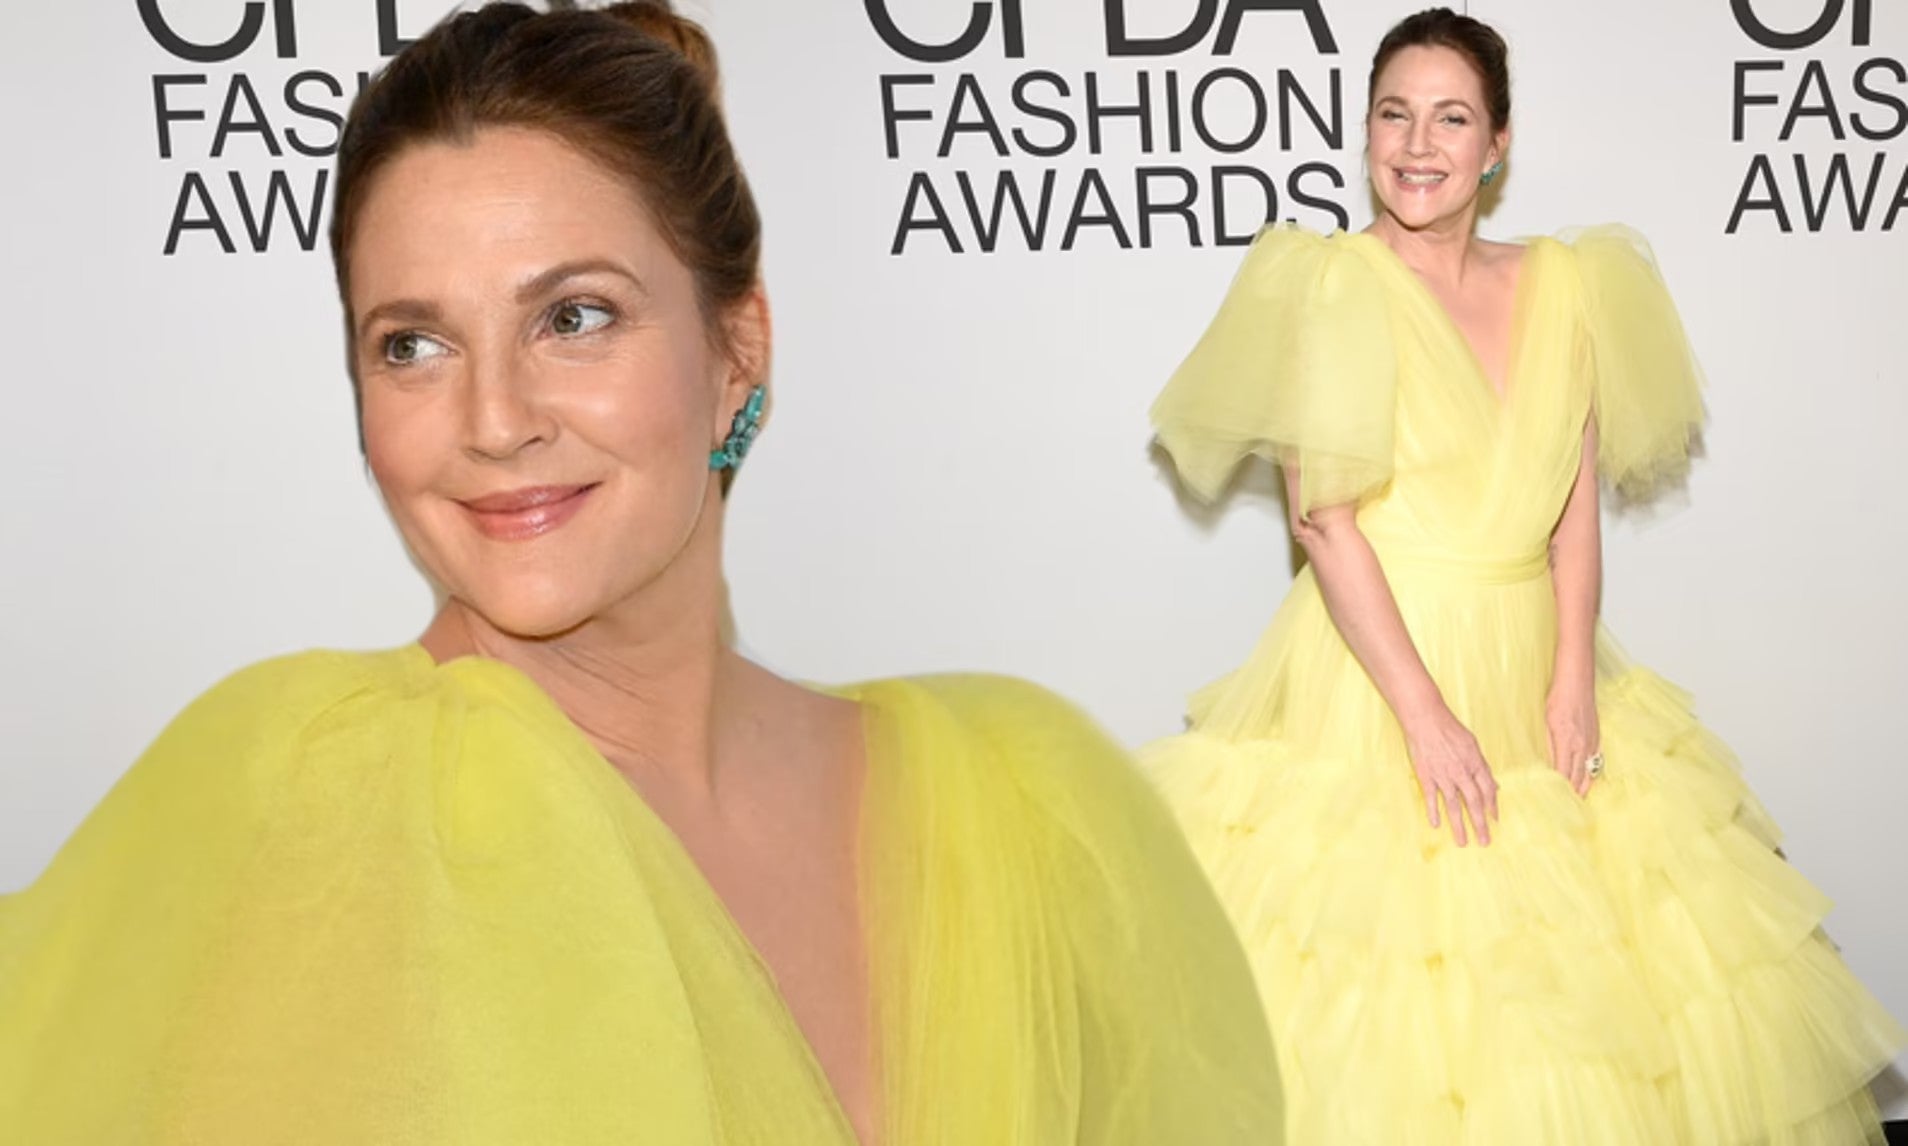 two images of Drew Barrymore combined, side by side, wearing a pouffy yellow dress at the GQ Fashion Awards.